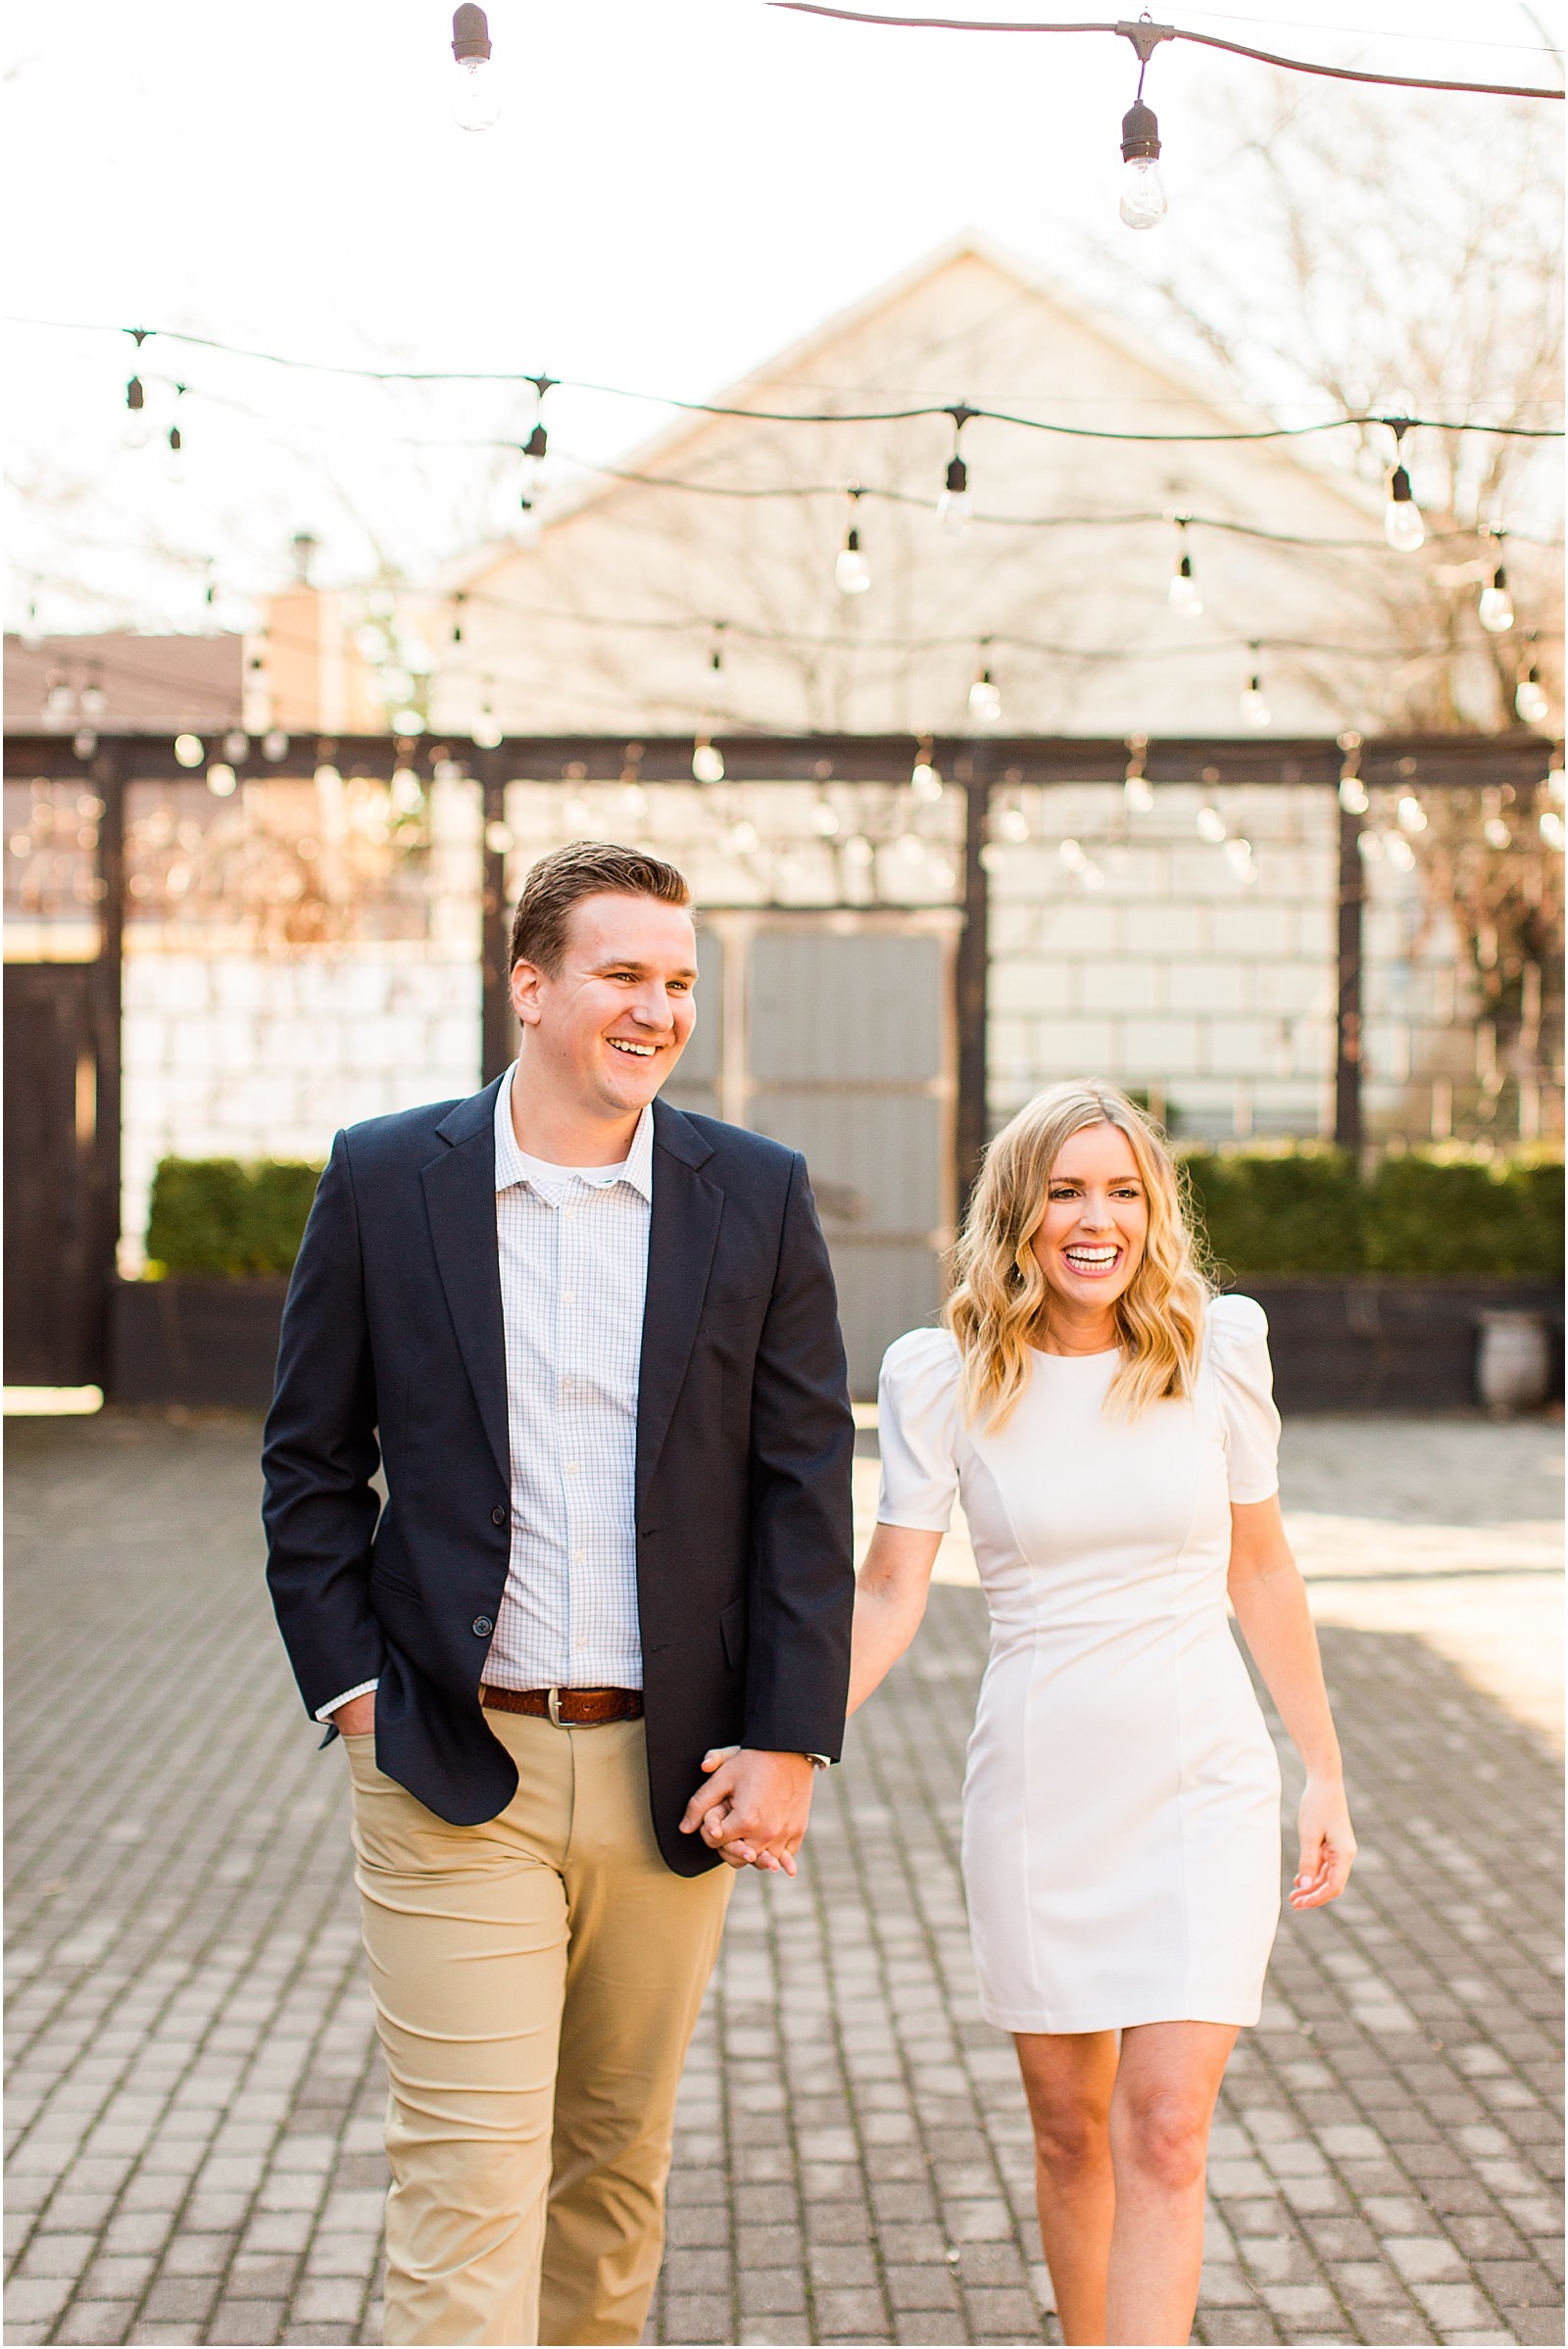 Madison and Christaan | A 20 West Engagement Session in Downto wn Newburgh | Bret and Brandie Photography010.jpg